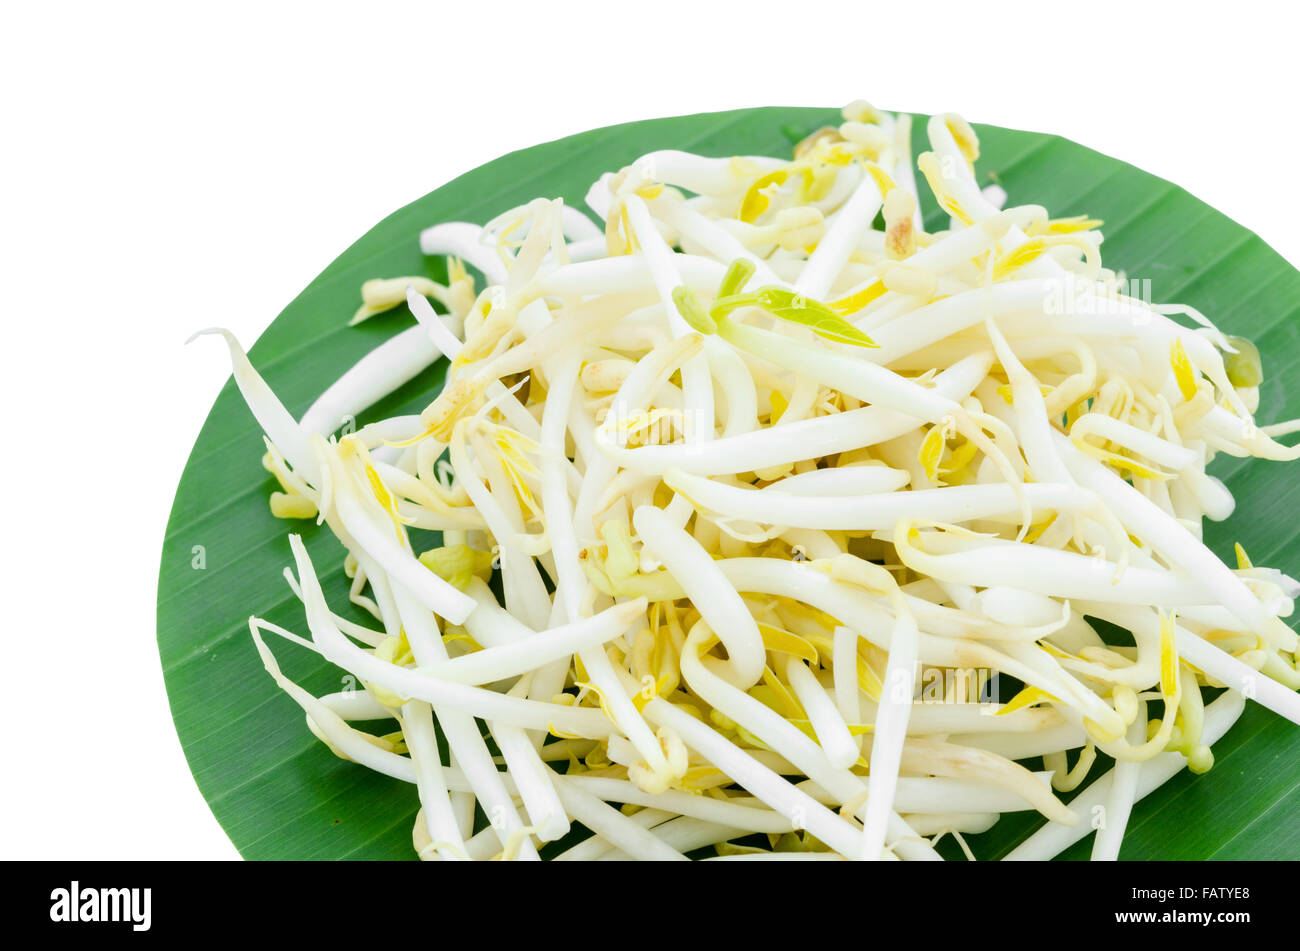 Mung bean Sprouts on green leaf isolated on white background. Stock Photo